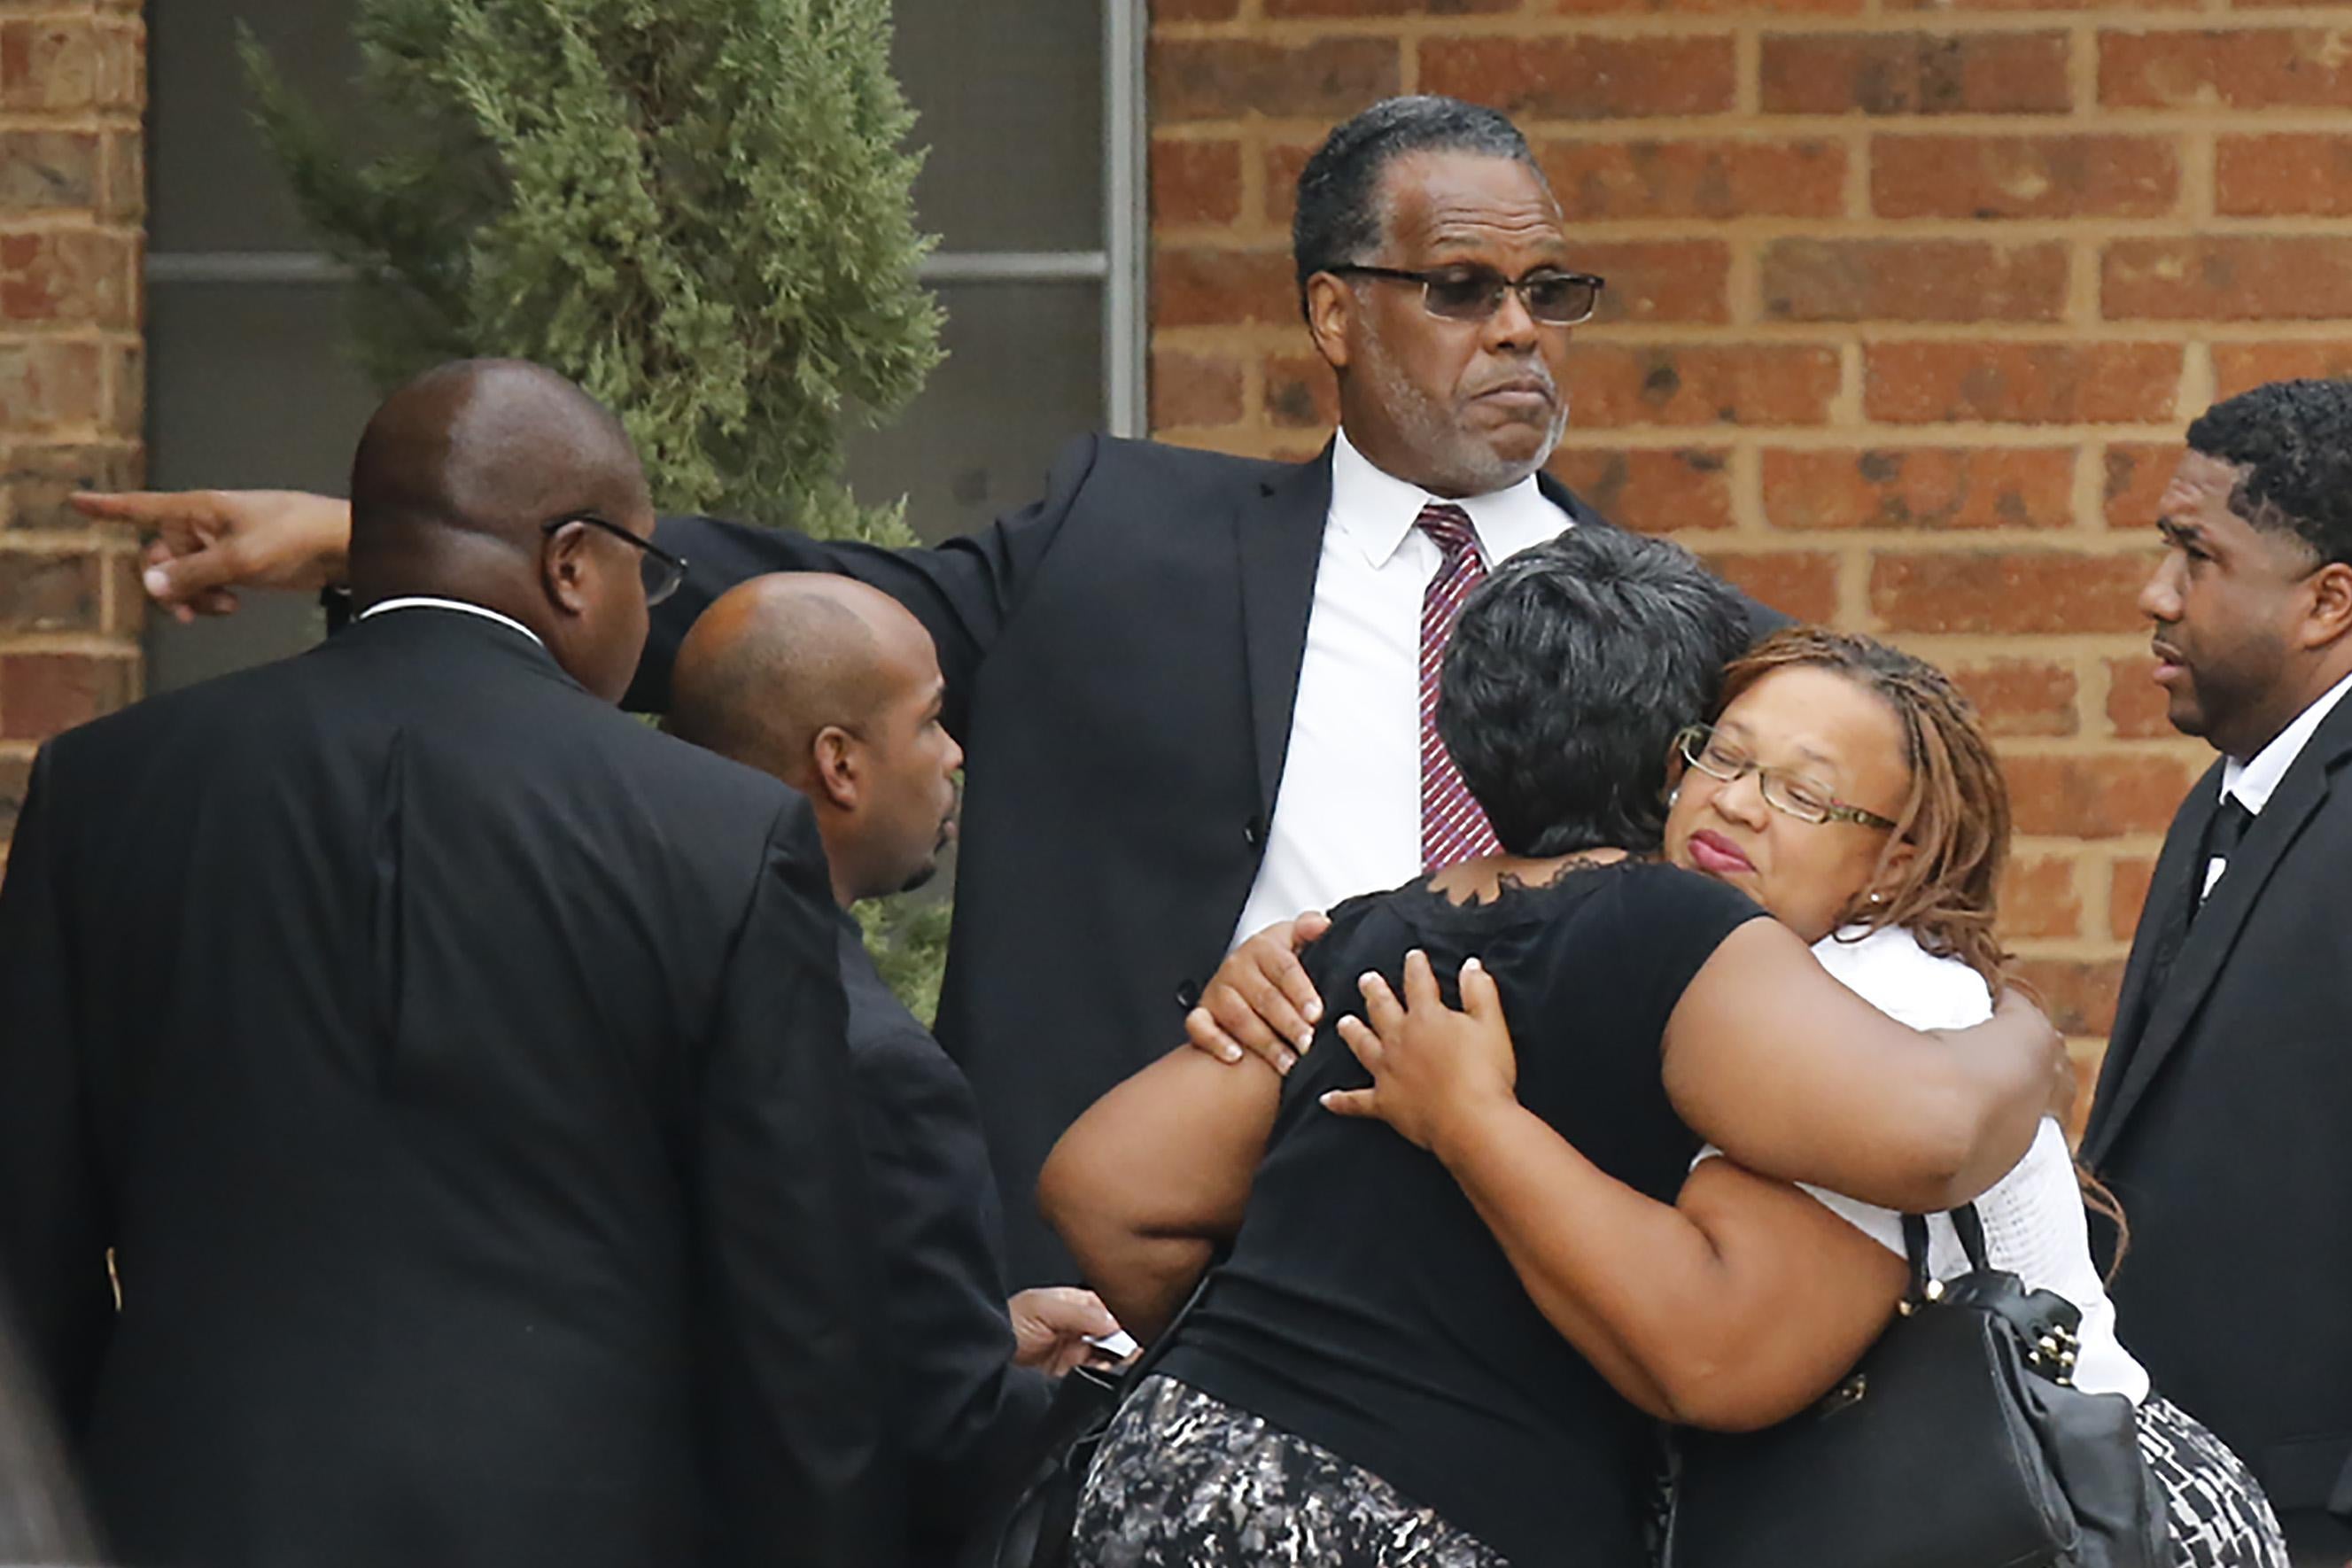 Two women, dressed in funeral clothes, embrace. A man in a suit directs people toward the service.